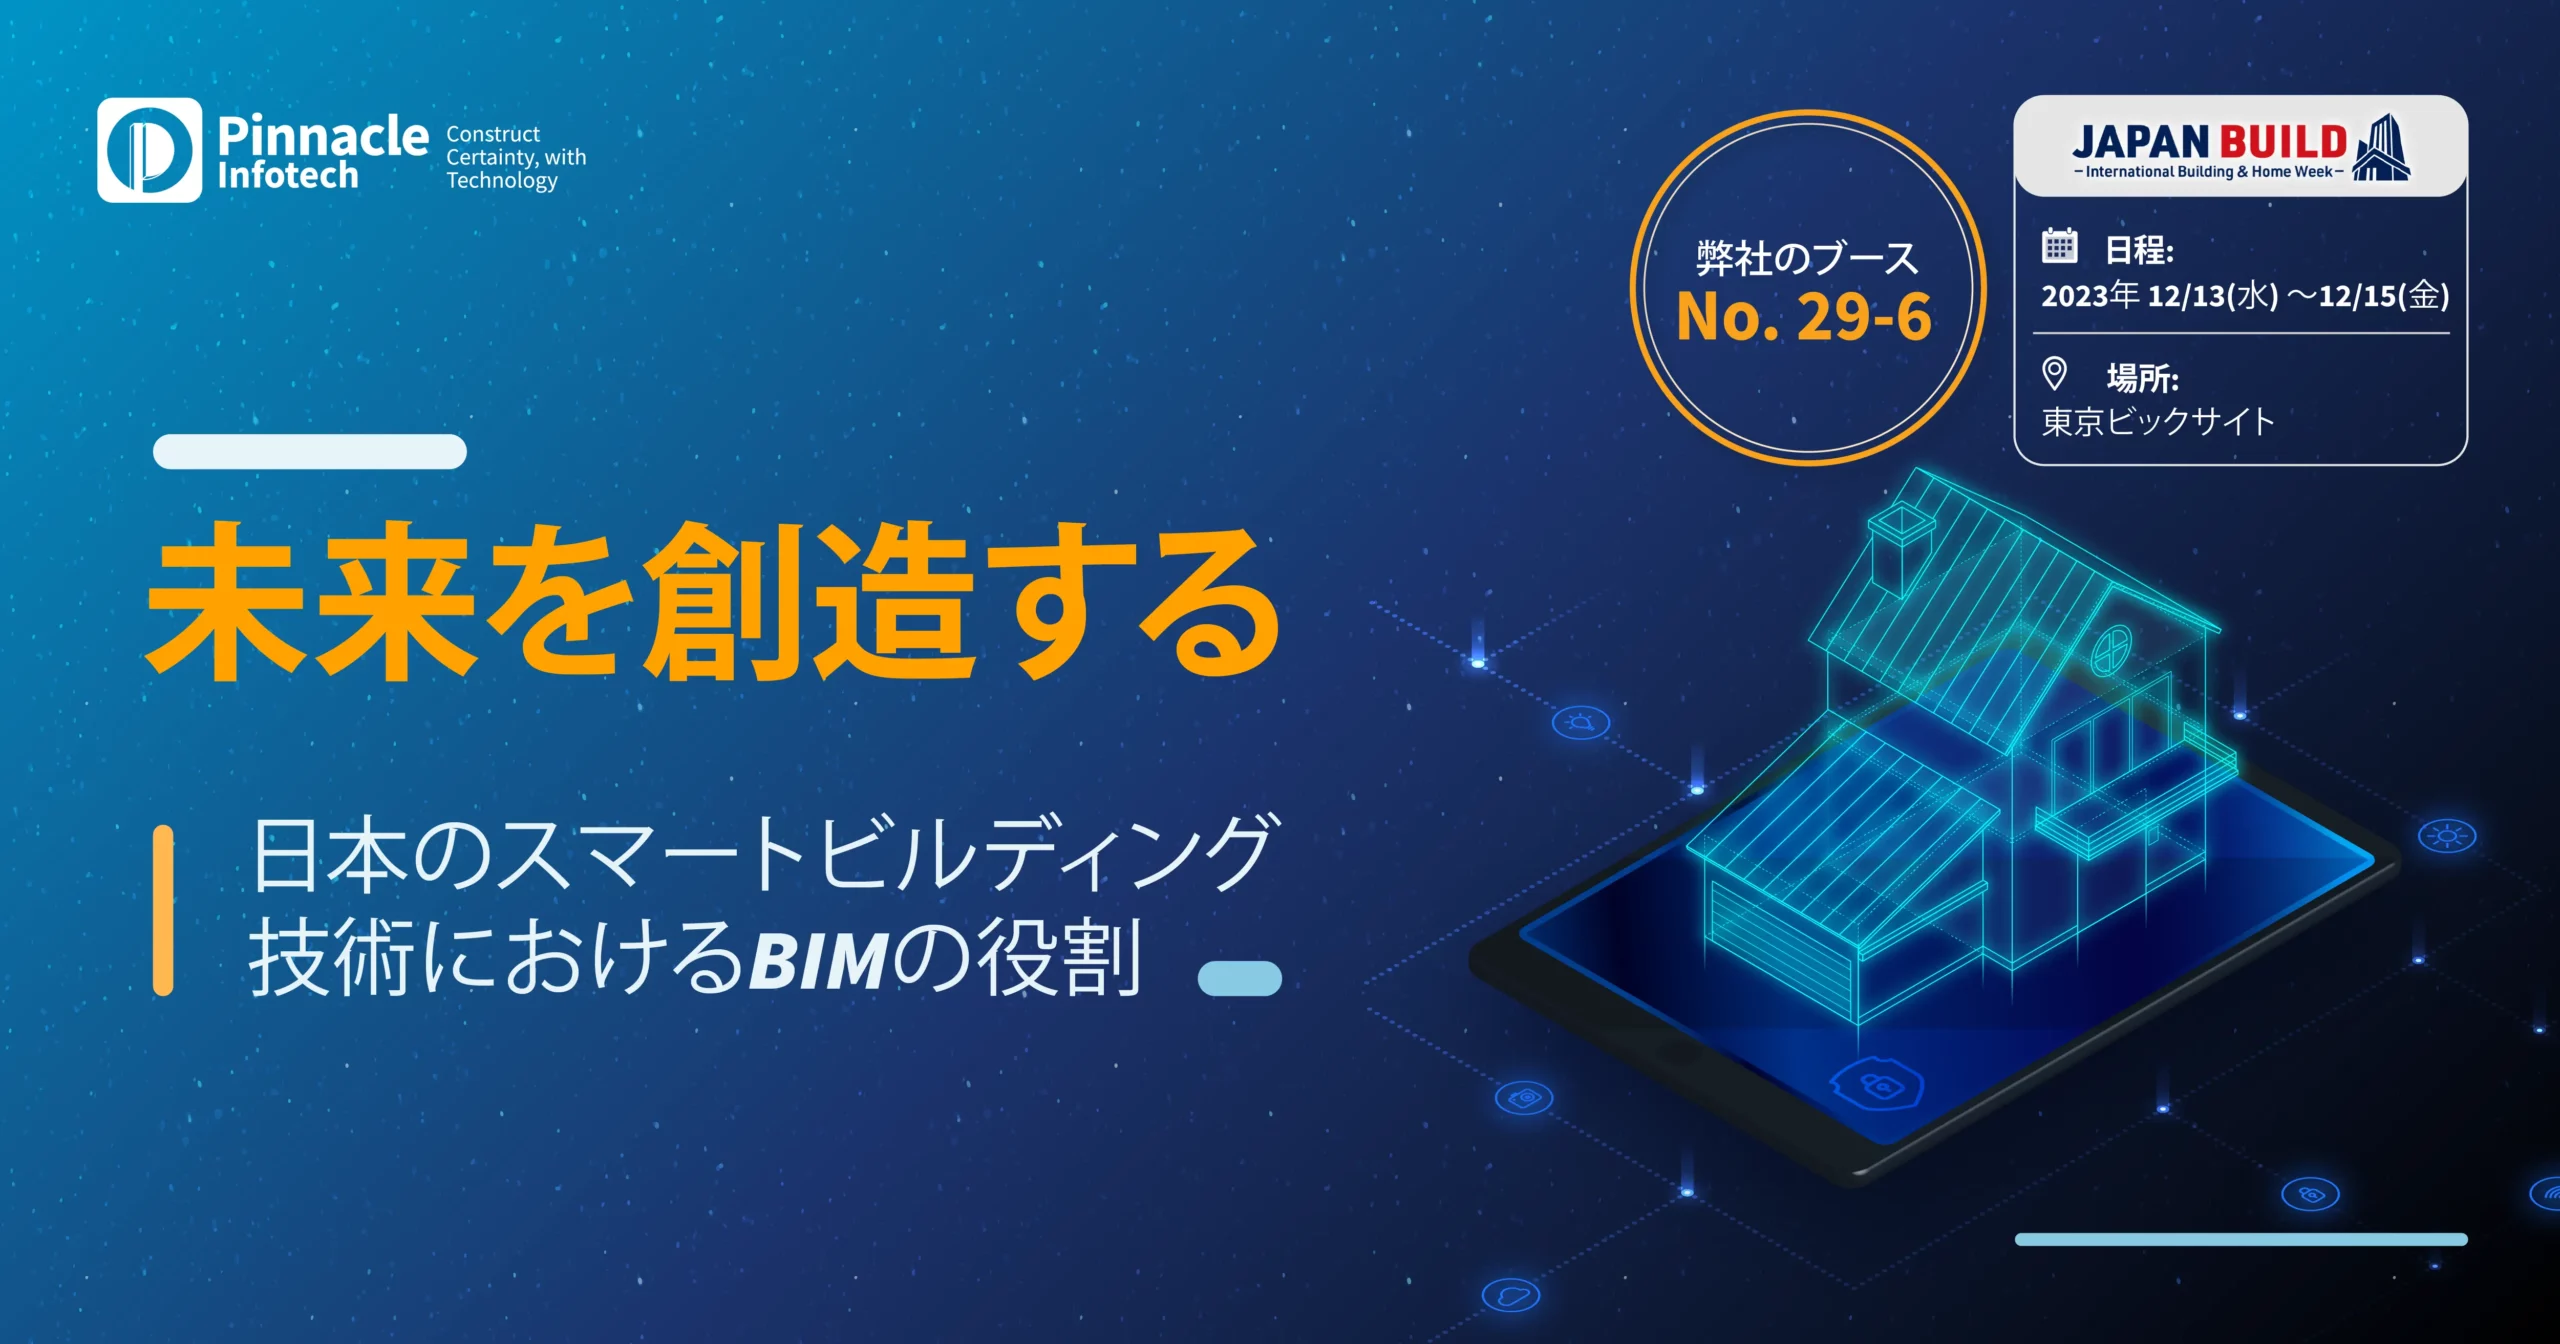 Building the Future BIM's Role in Japanese Smart Building Technology-Japanese cover